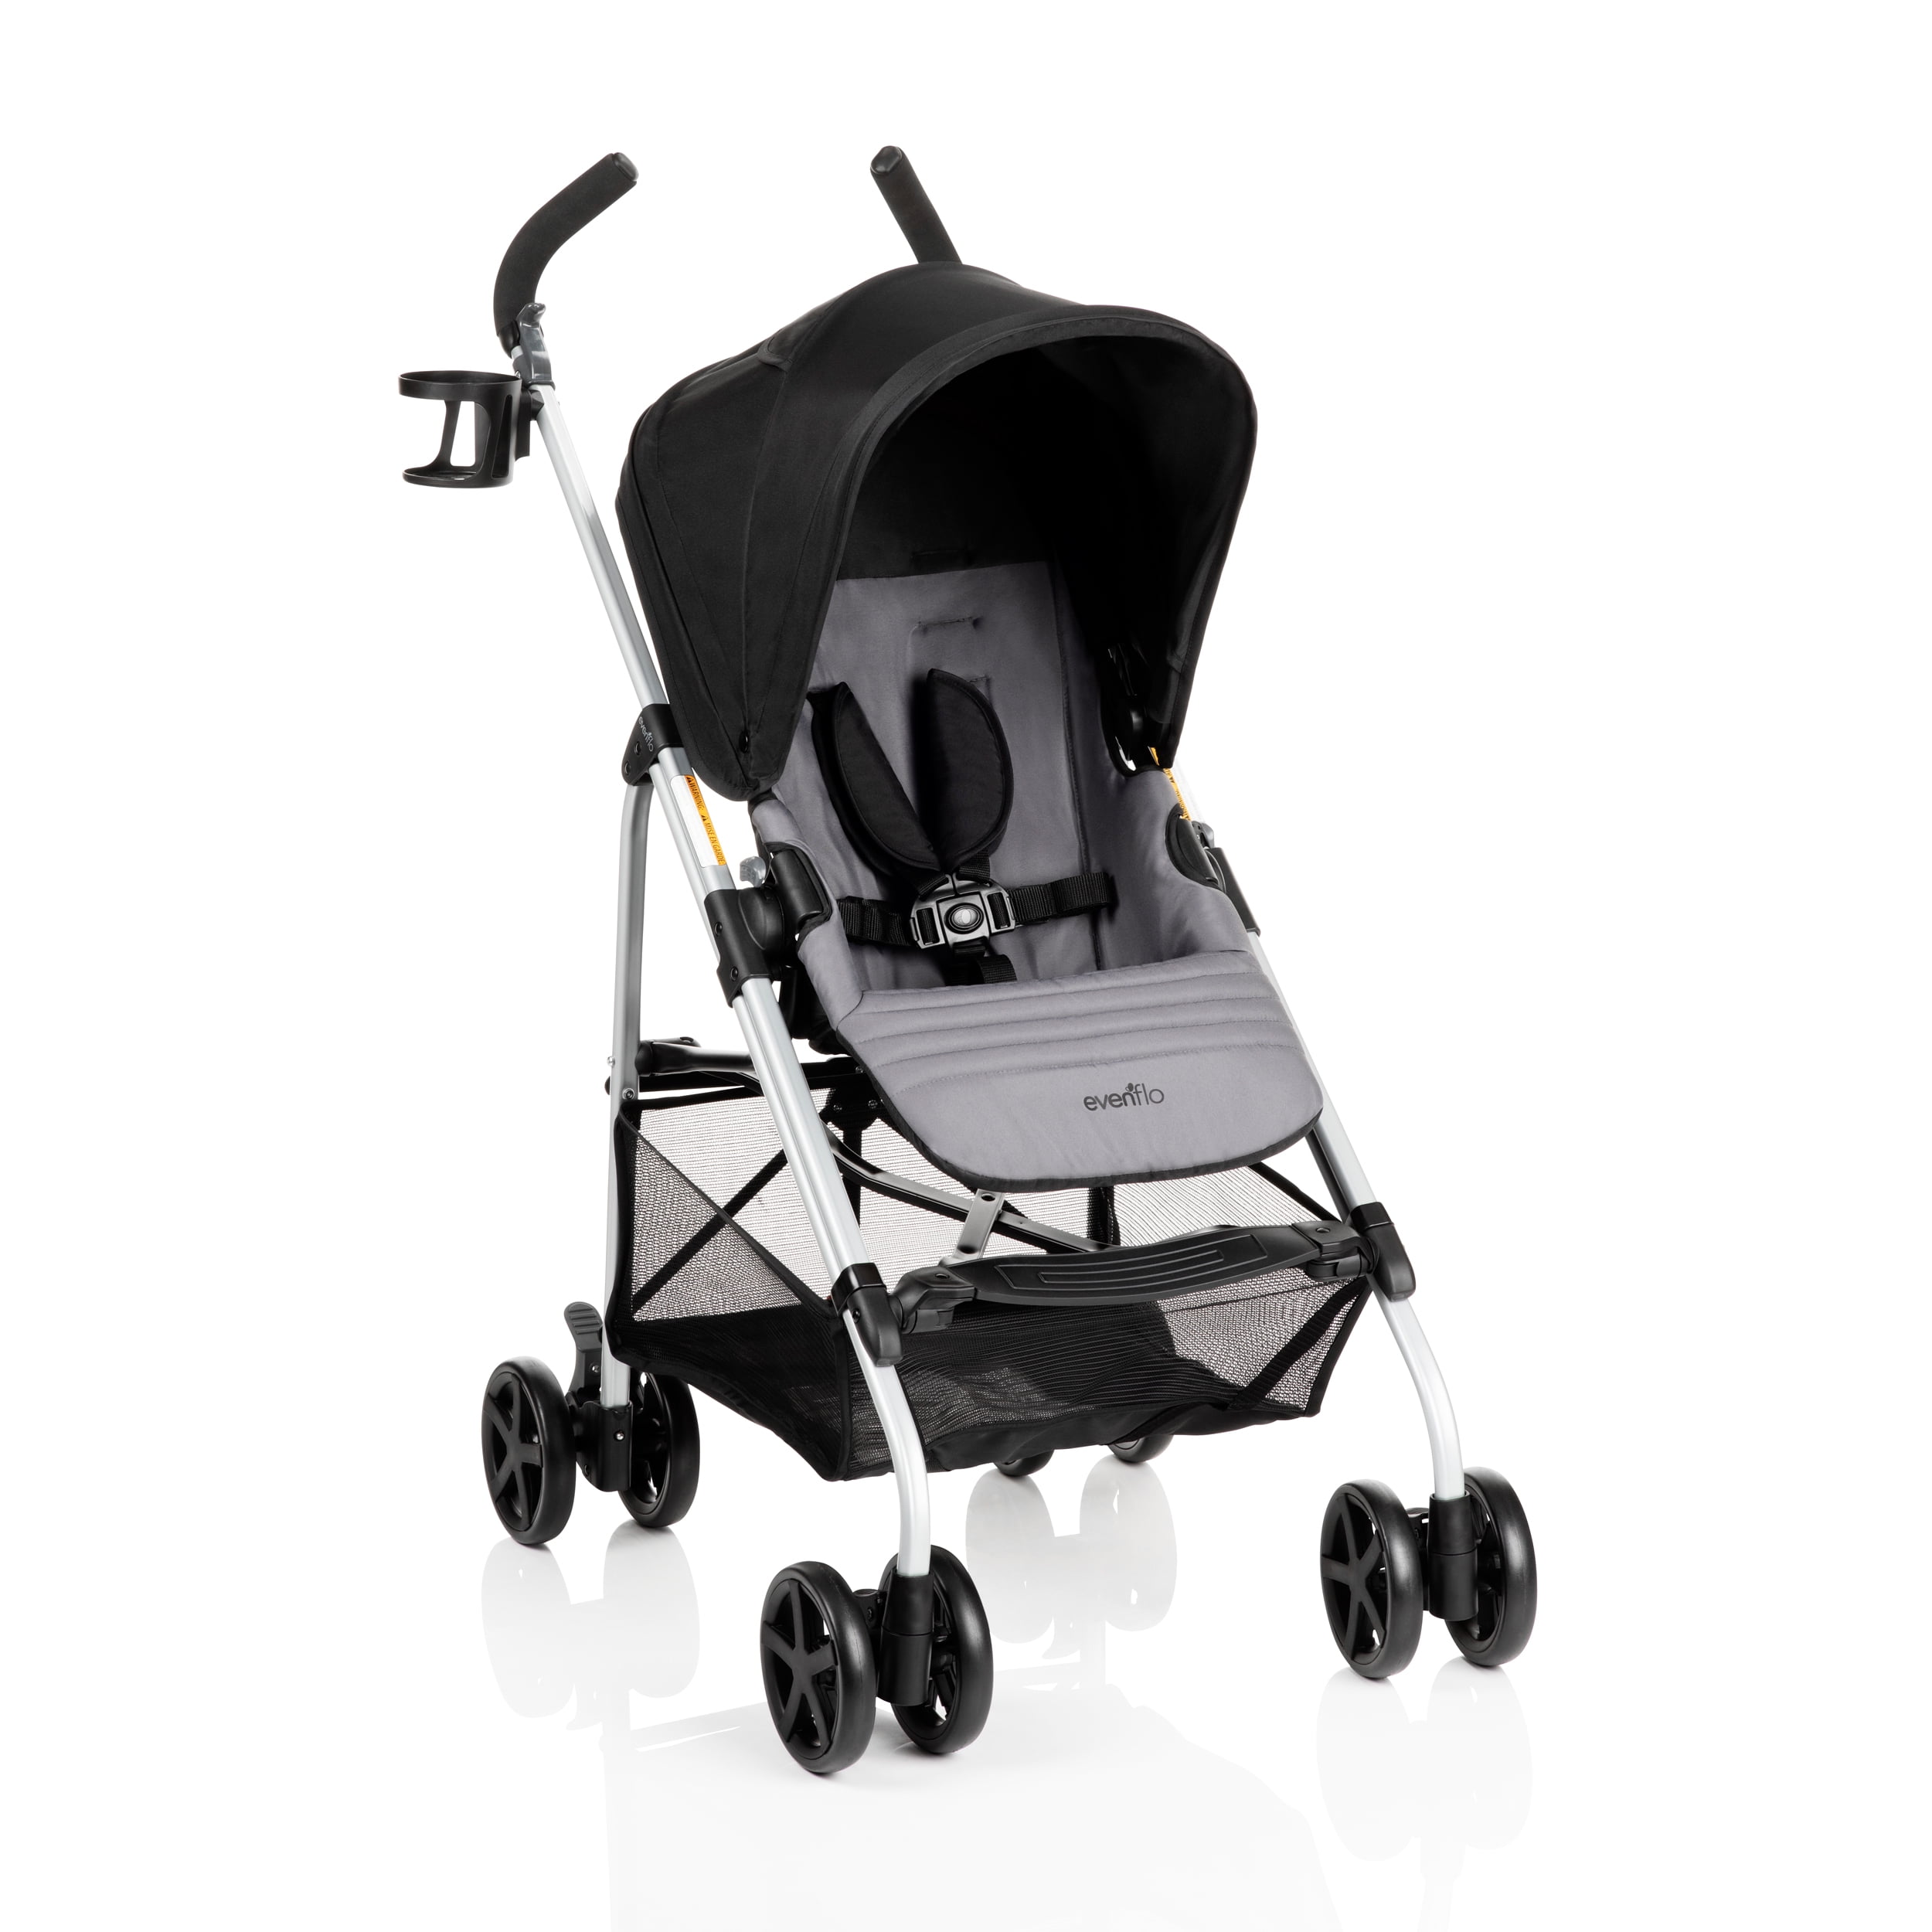 pushchair offers